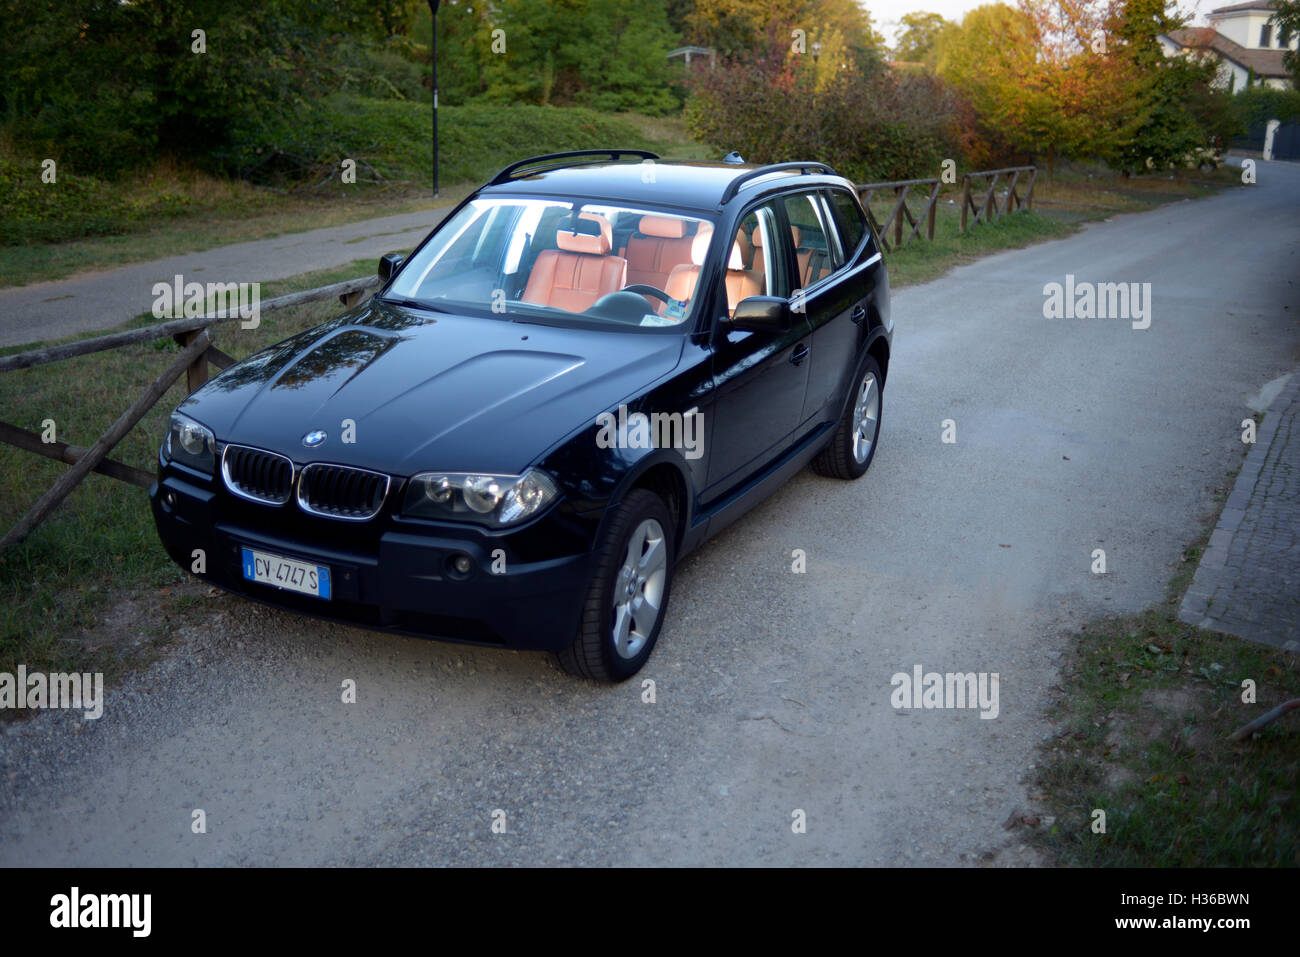 Car, BMW X3, cross country vehicle, SUV, 4x4, model year 2005-, black, driving, frontal view Stock Photo